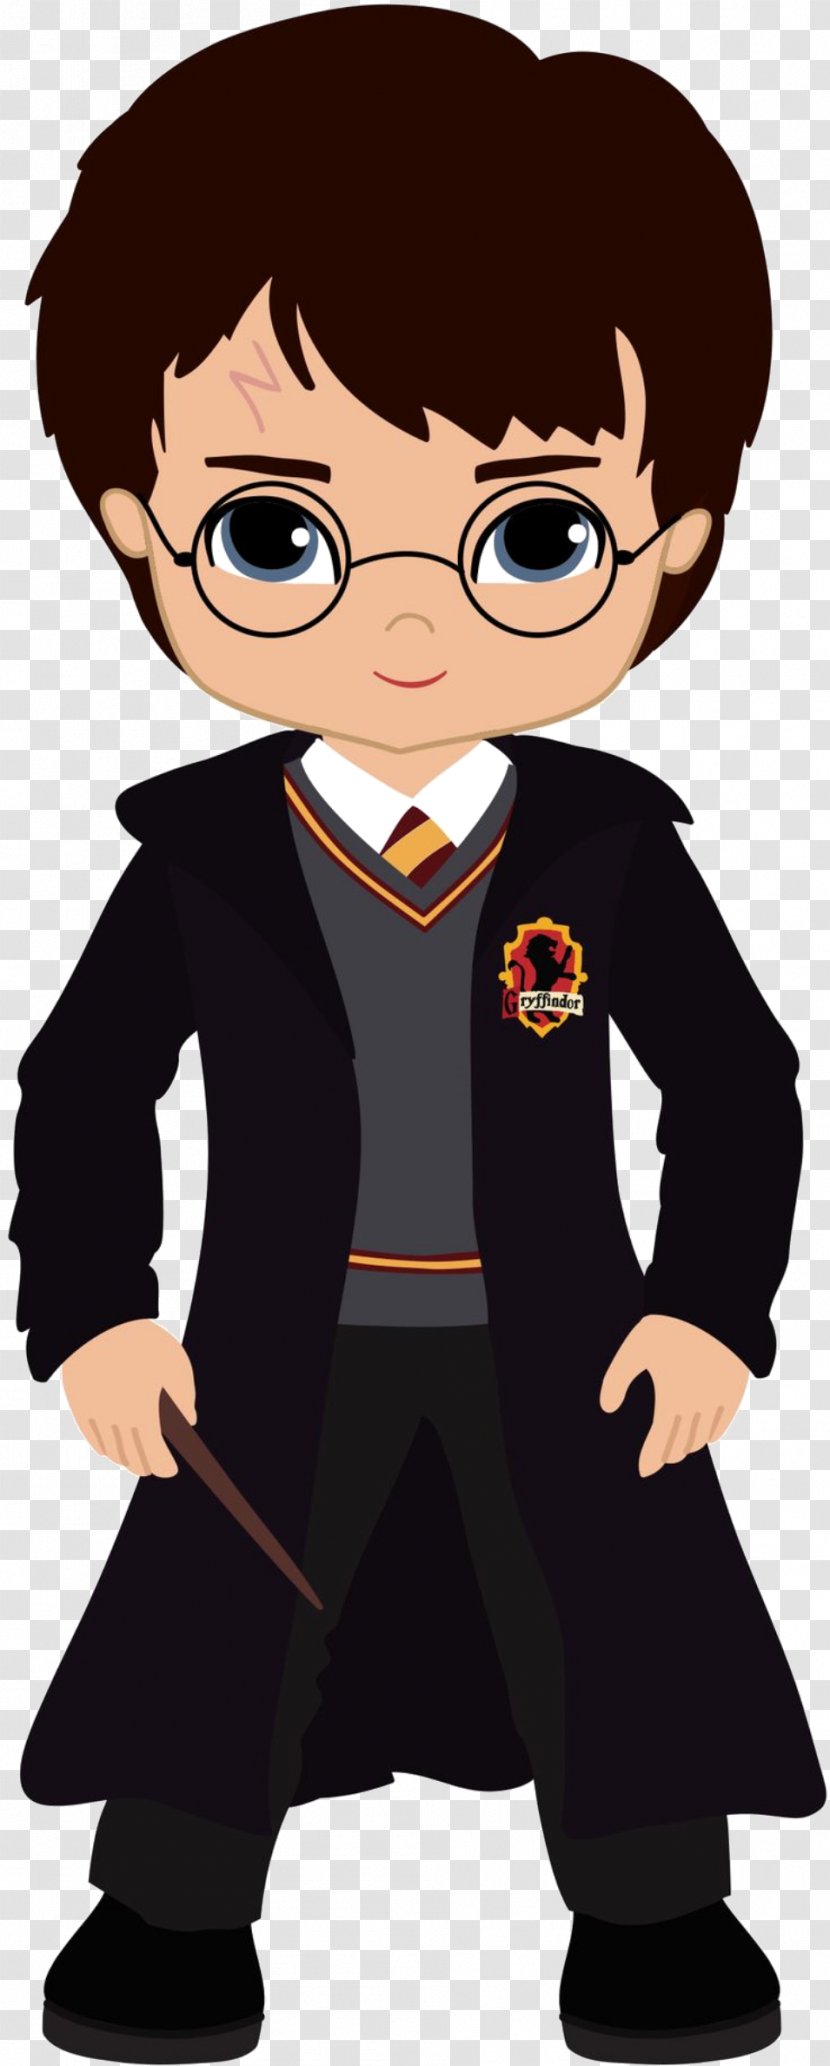 Harry Potter (Literary Series) Clip Art Openclipart Hogwarts School Of Witchcraft And Wizardry - Literary Series Transparent PNG